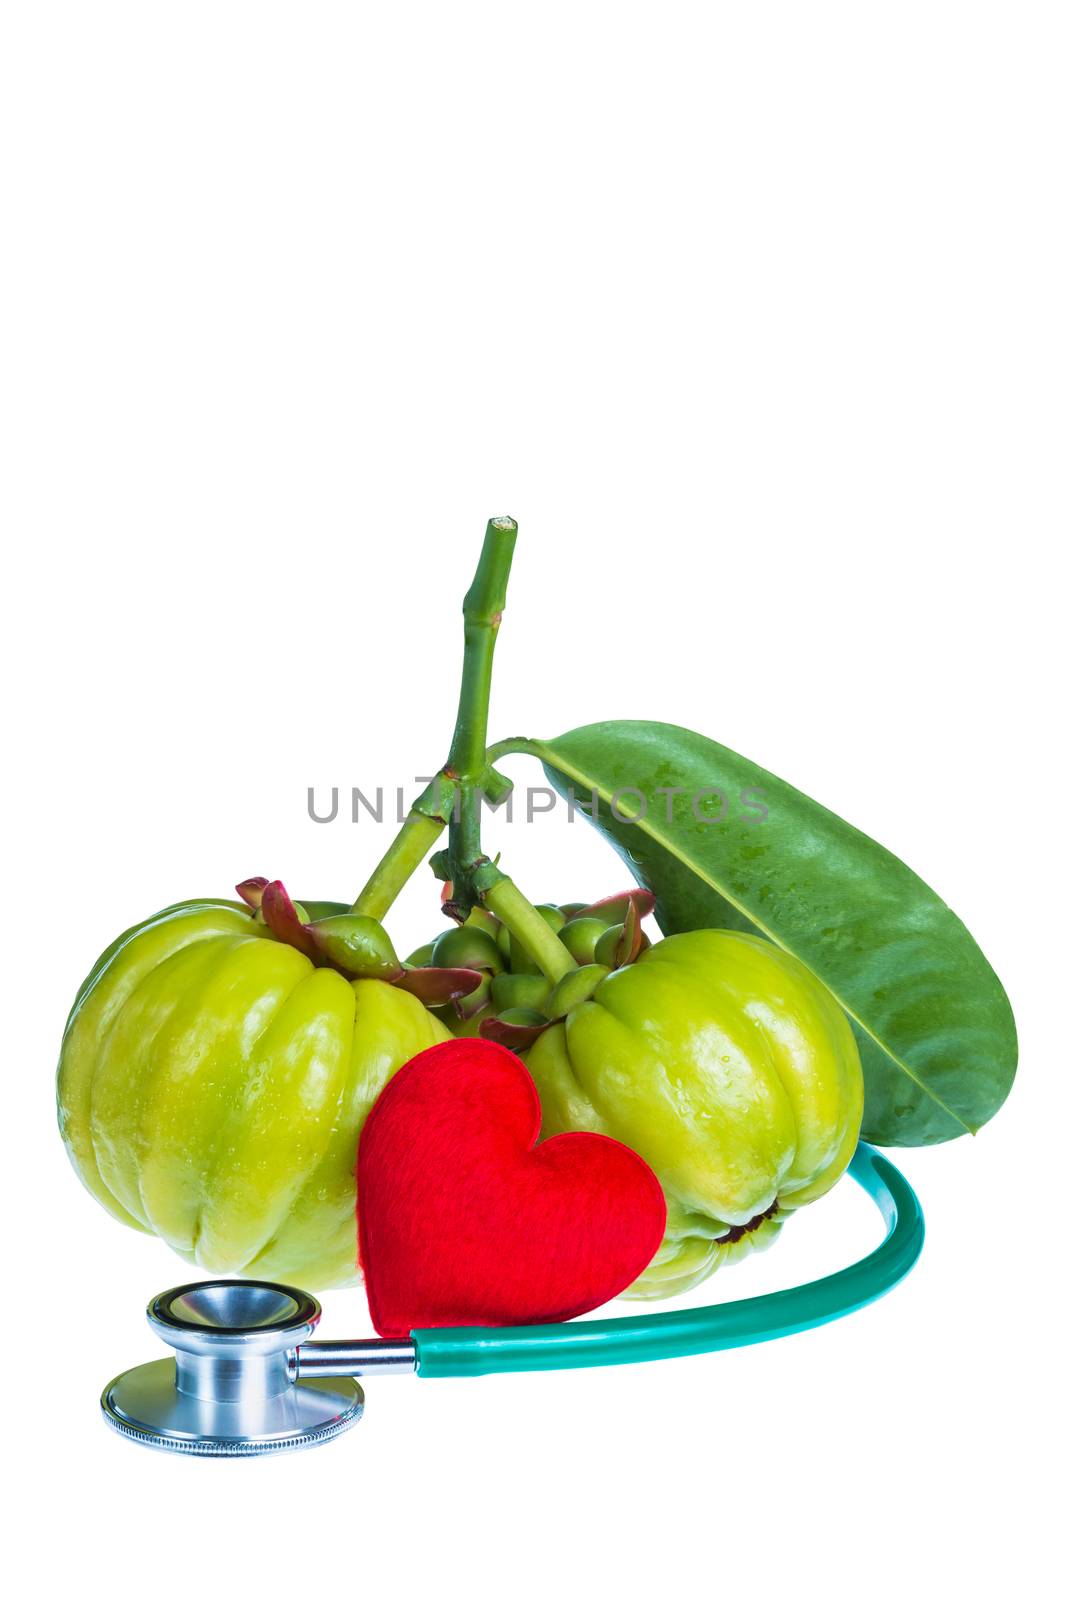 Still life garcinia atroviridis fresh fruit, red heart-shaped and stethoscope. Isolated on white background. Thai herb and sour flavor lots of vitamin C for good health. Extract as a weight loss product.